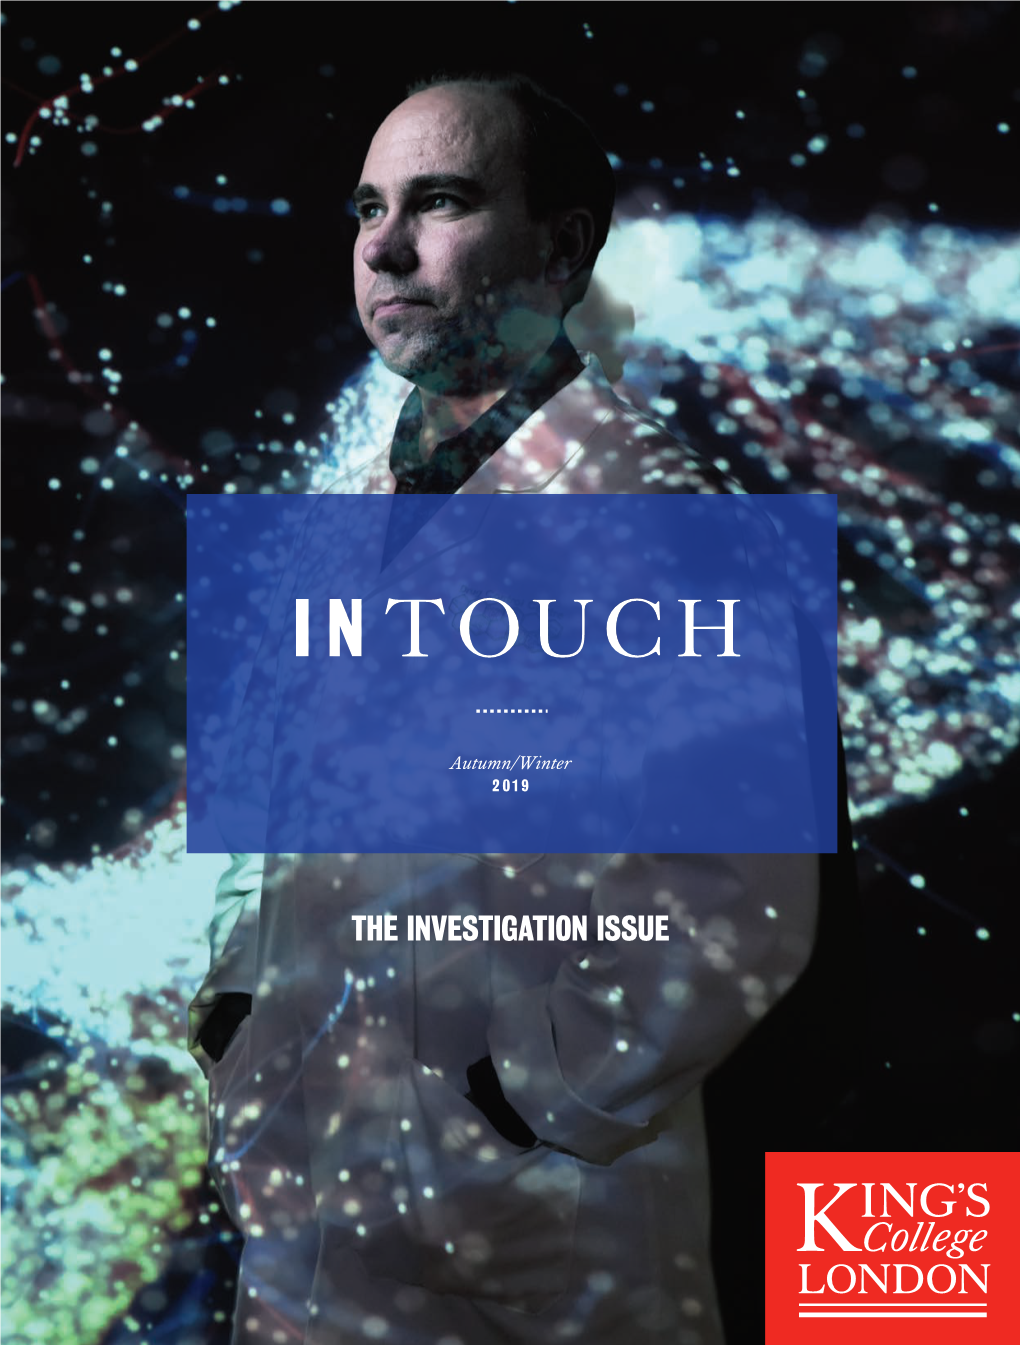 The Investigation Issue